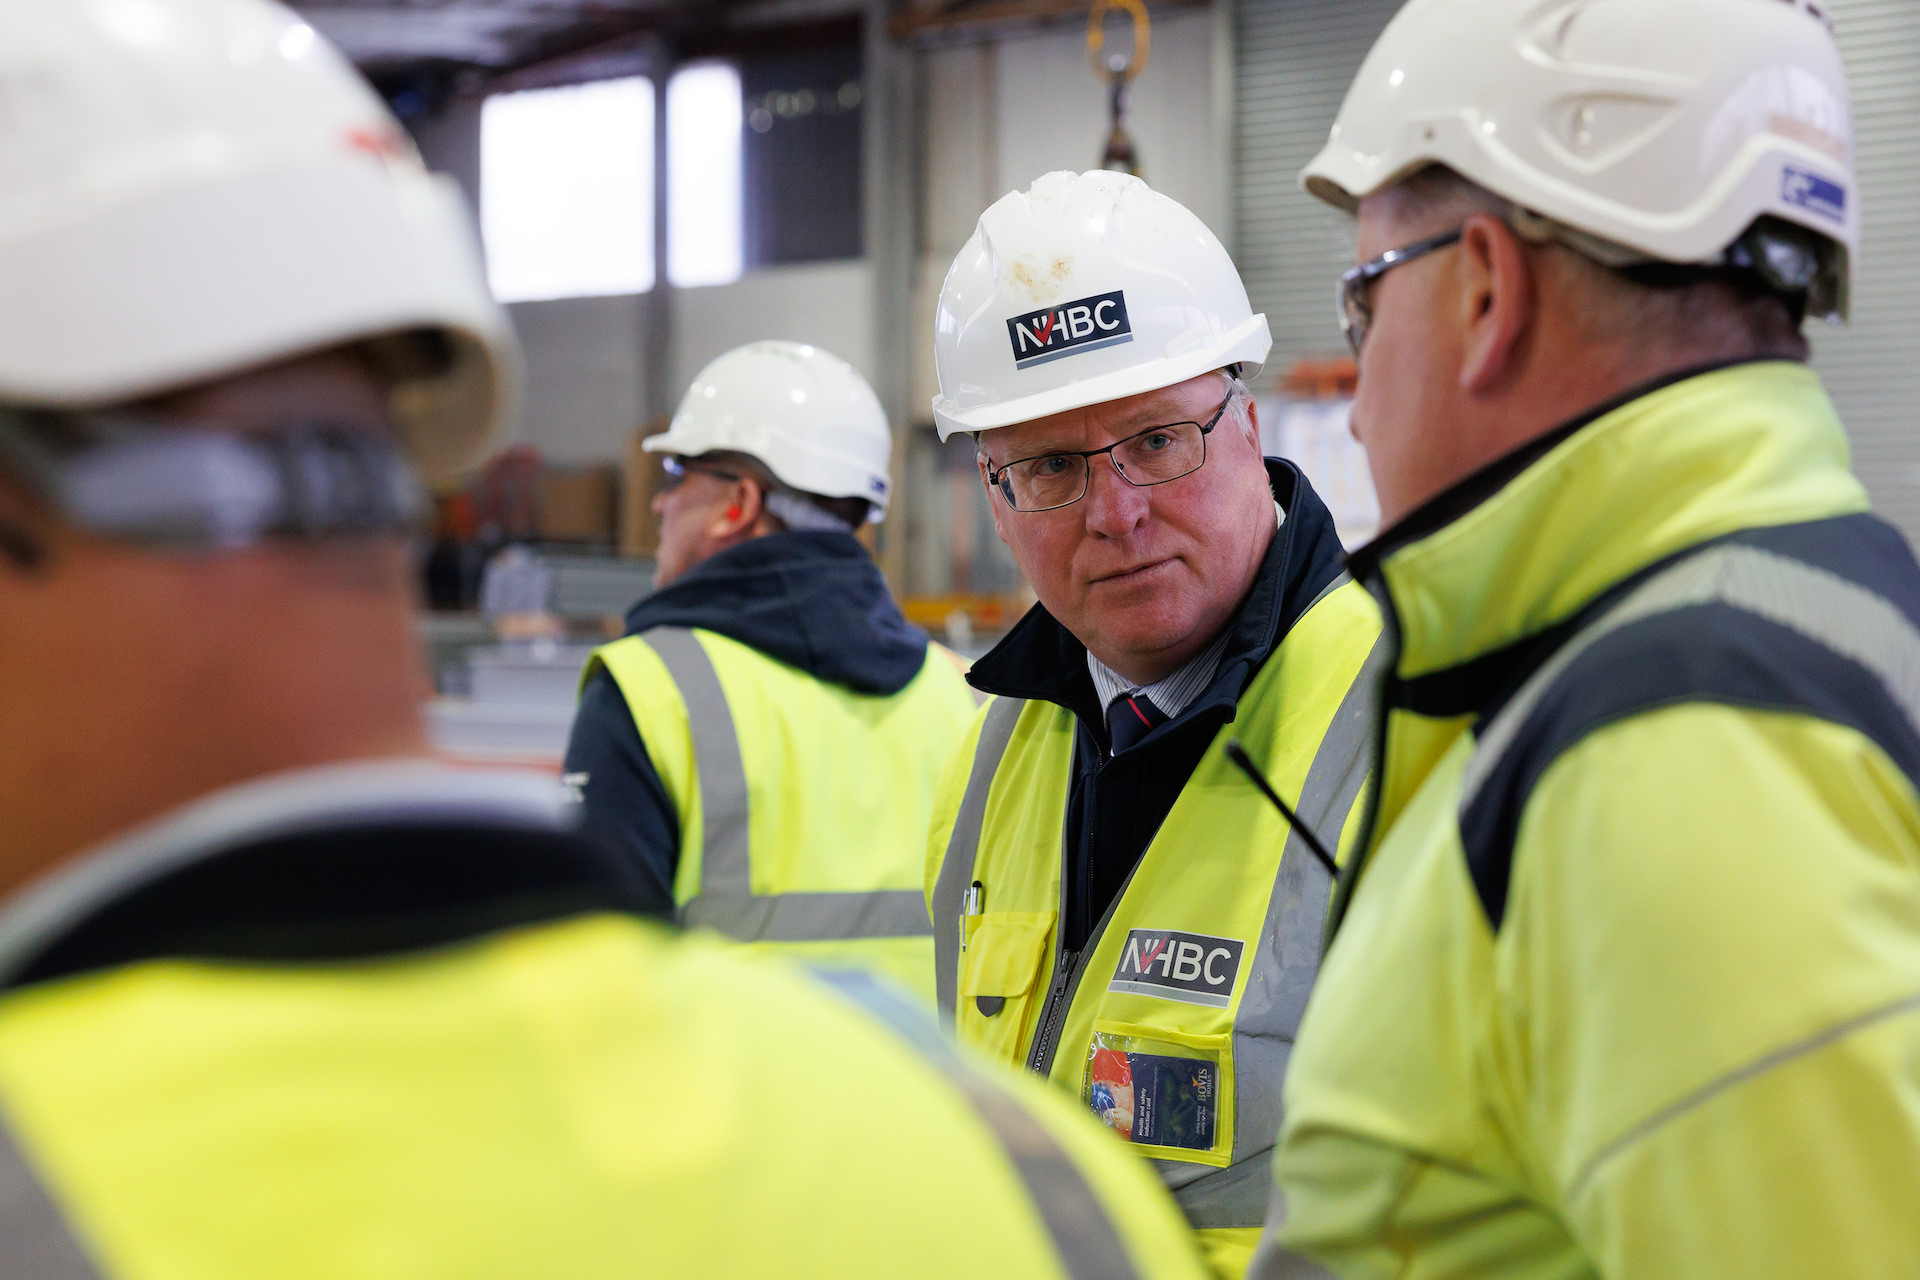 a photo of three people talking in site safety clothing